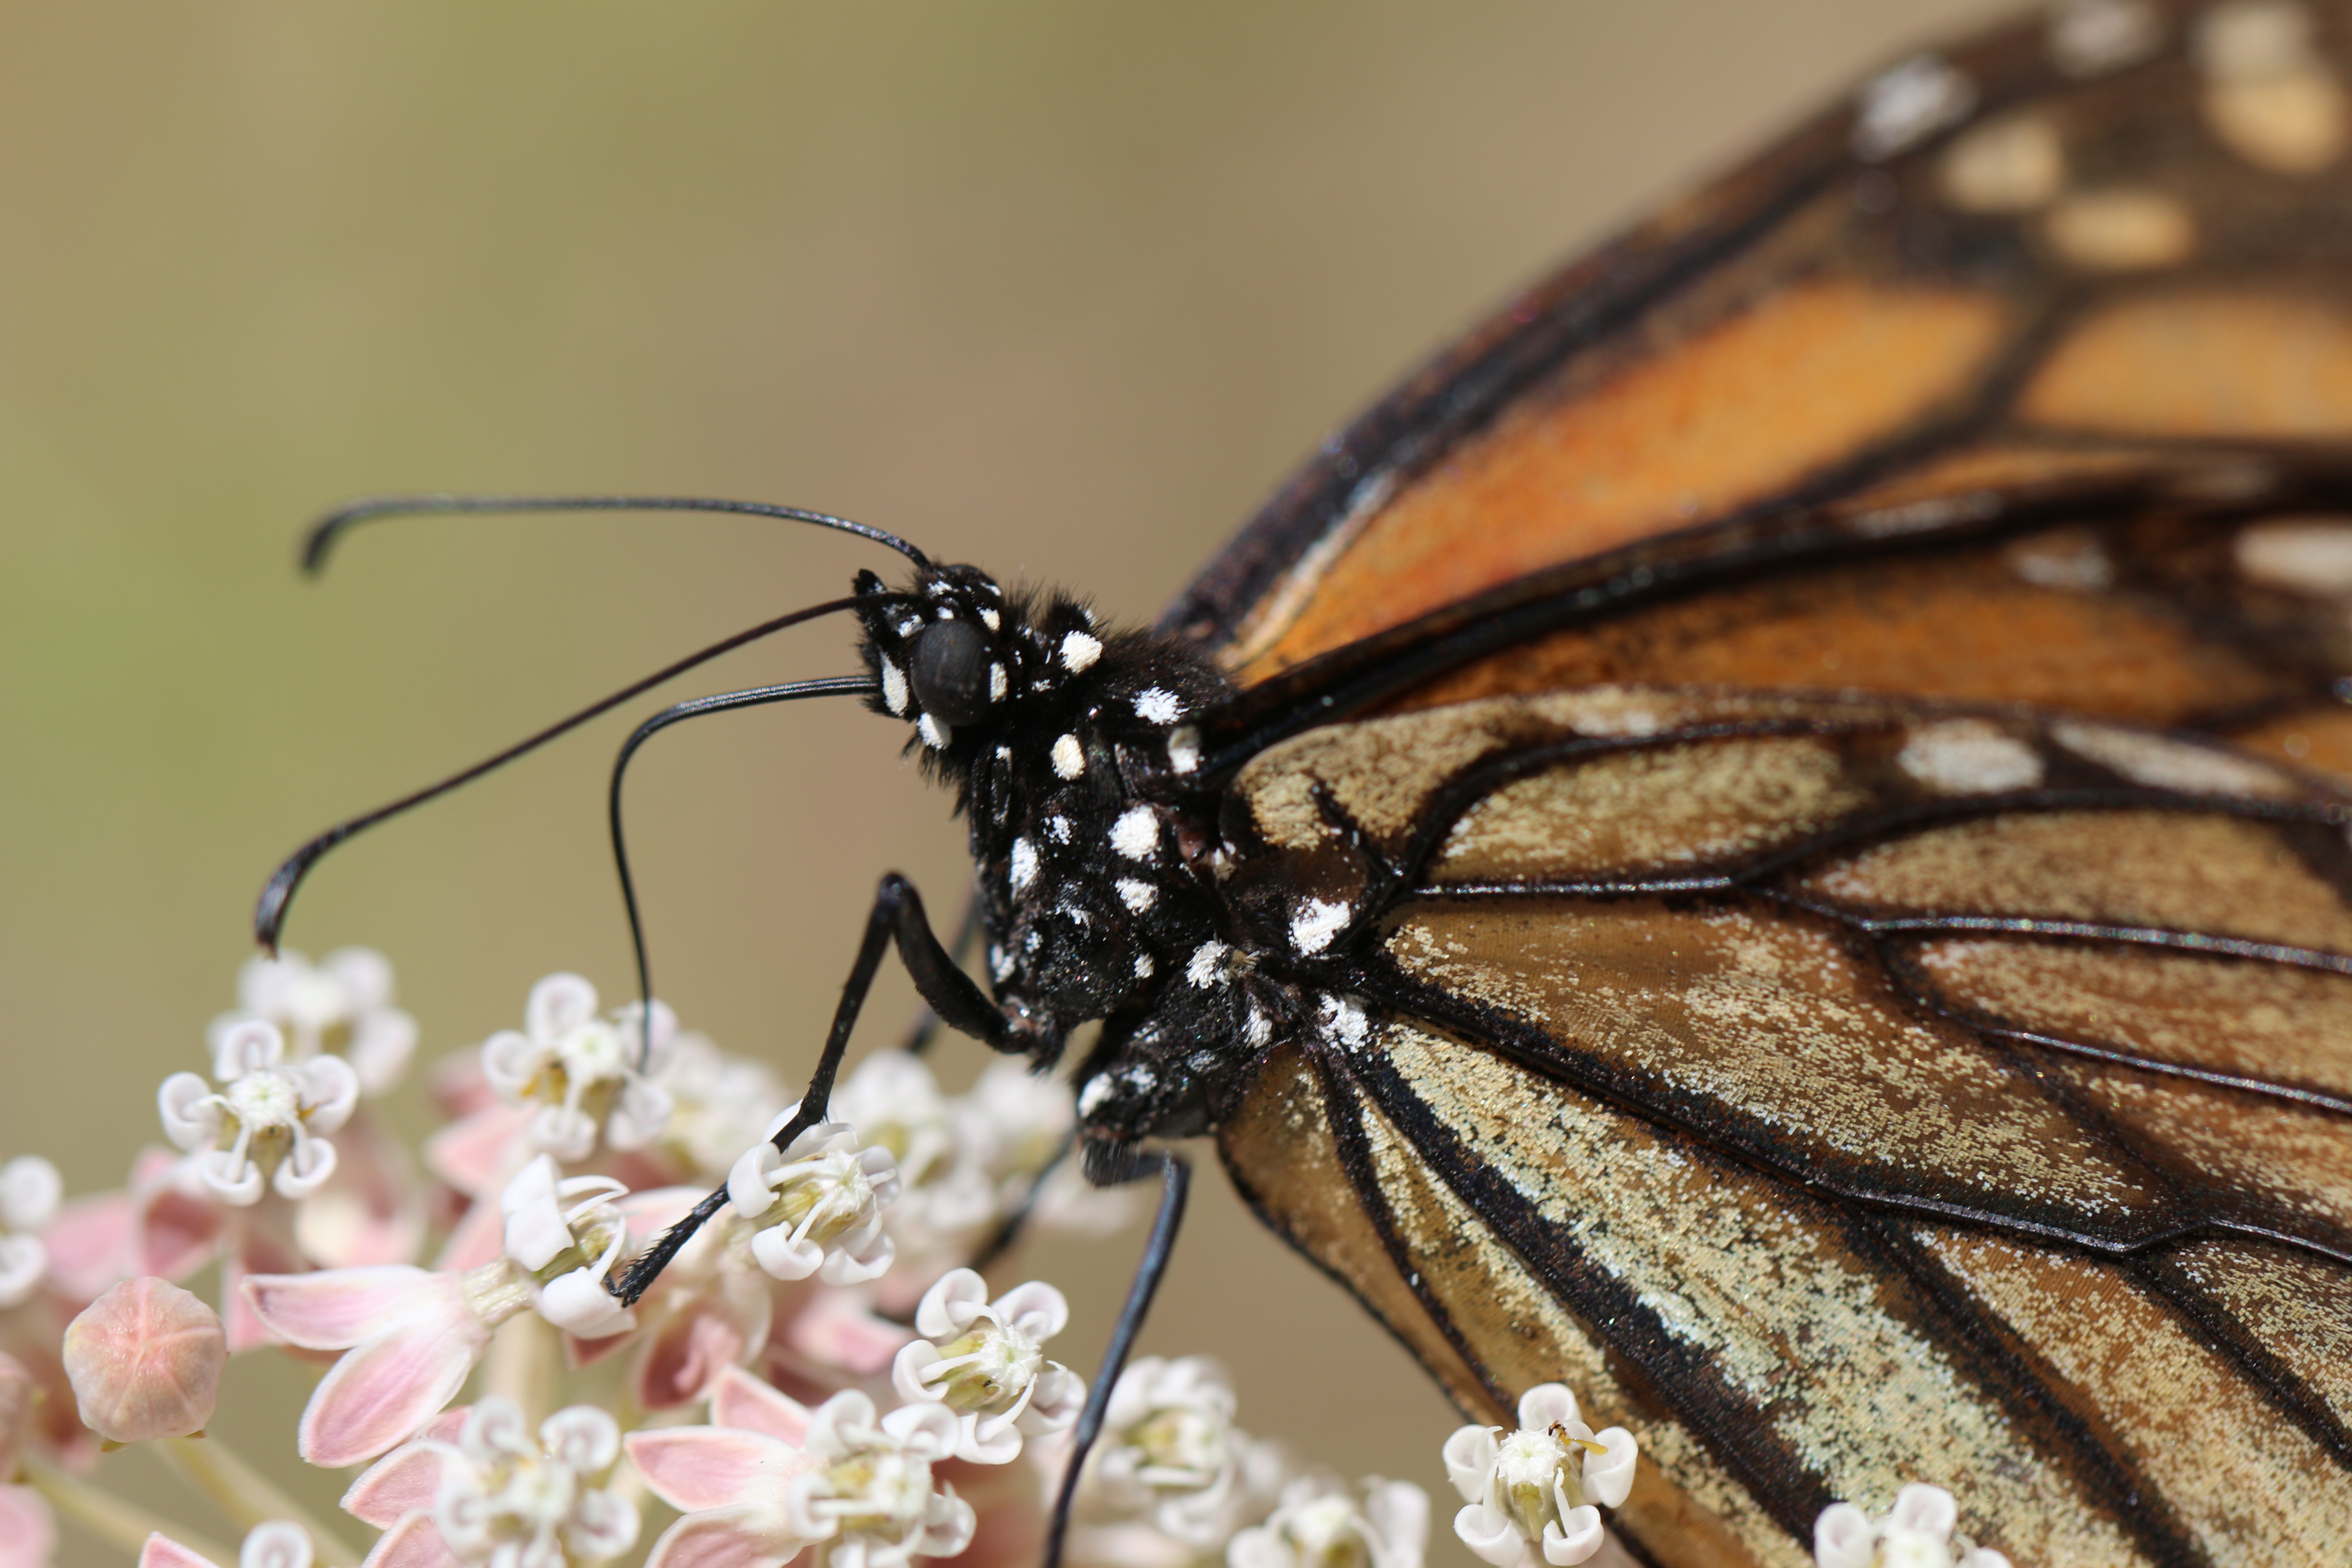 In this close-up photo, a monarch perches atop a cluster of small, white and pink flowers. The image is so detailed, you can see the eye of the monarch, and the scales on its wings.